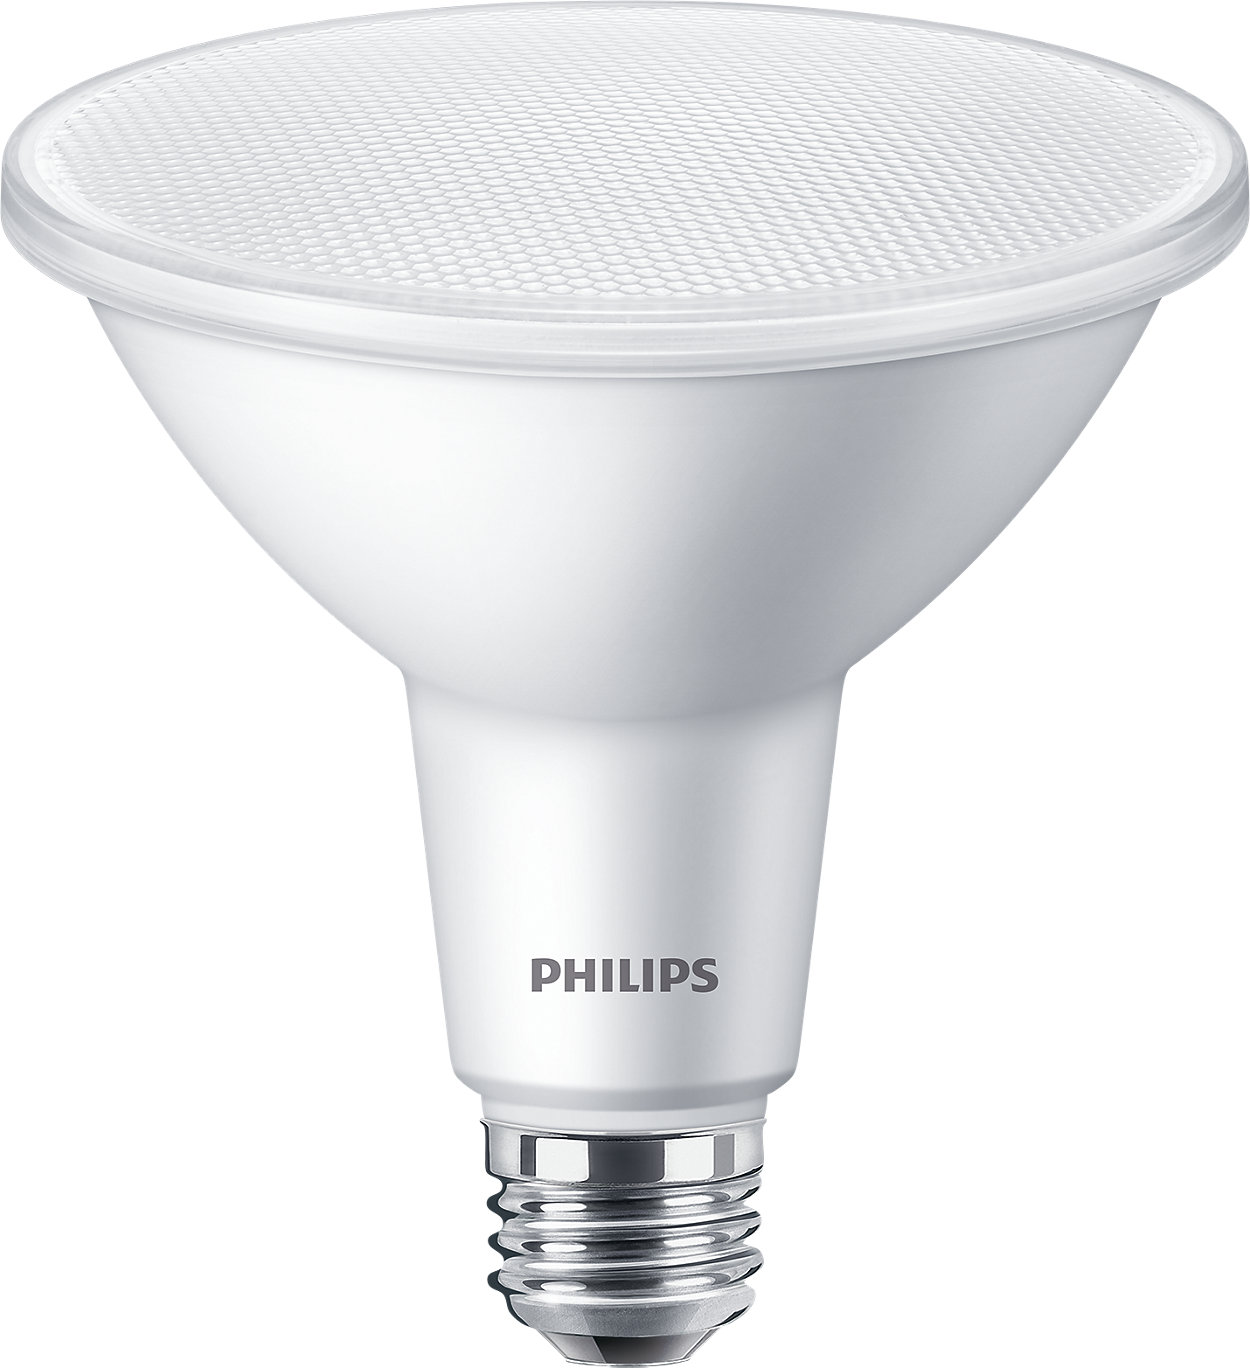 The affordable LED solution